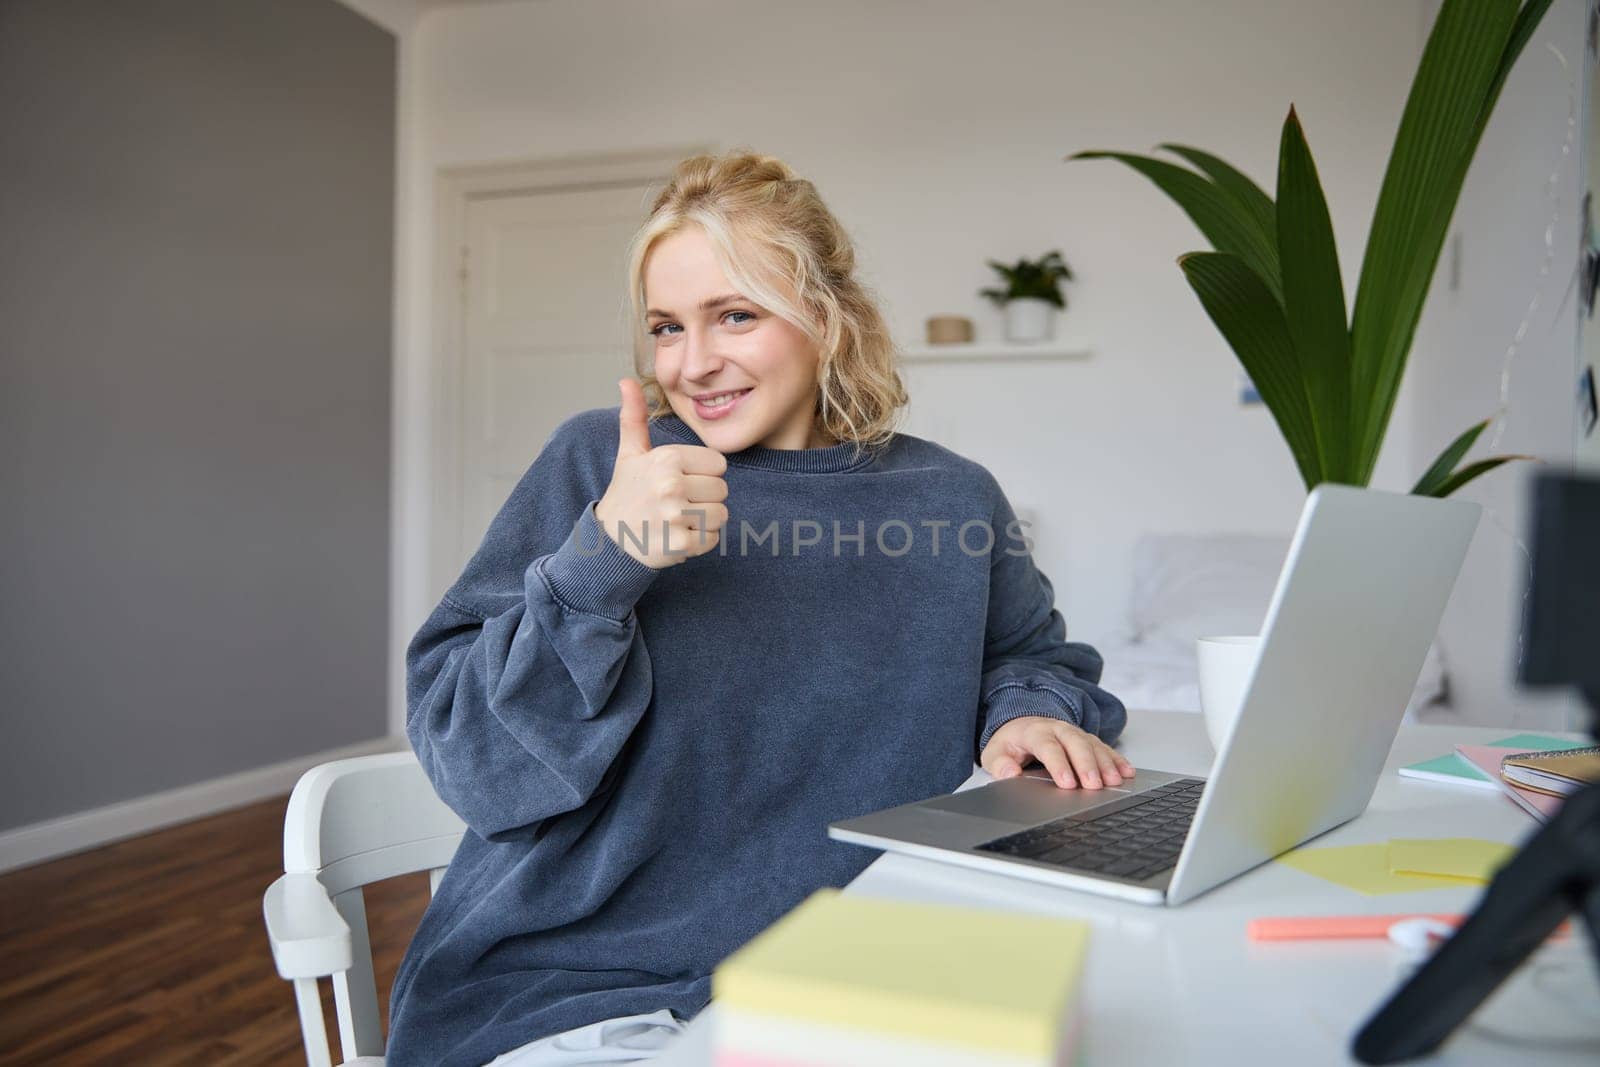 Portrait of smiling young blond woman, girl student studying from home, using online academy, doing course in internet, using laptop, showing thumbs up. Concept of distance learning.